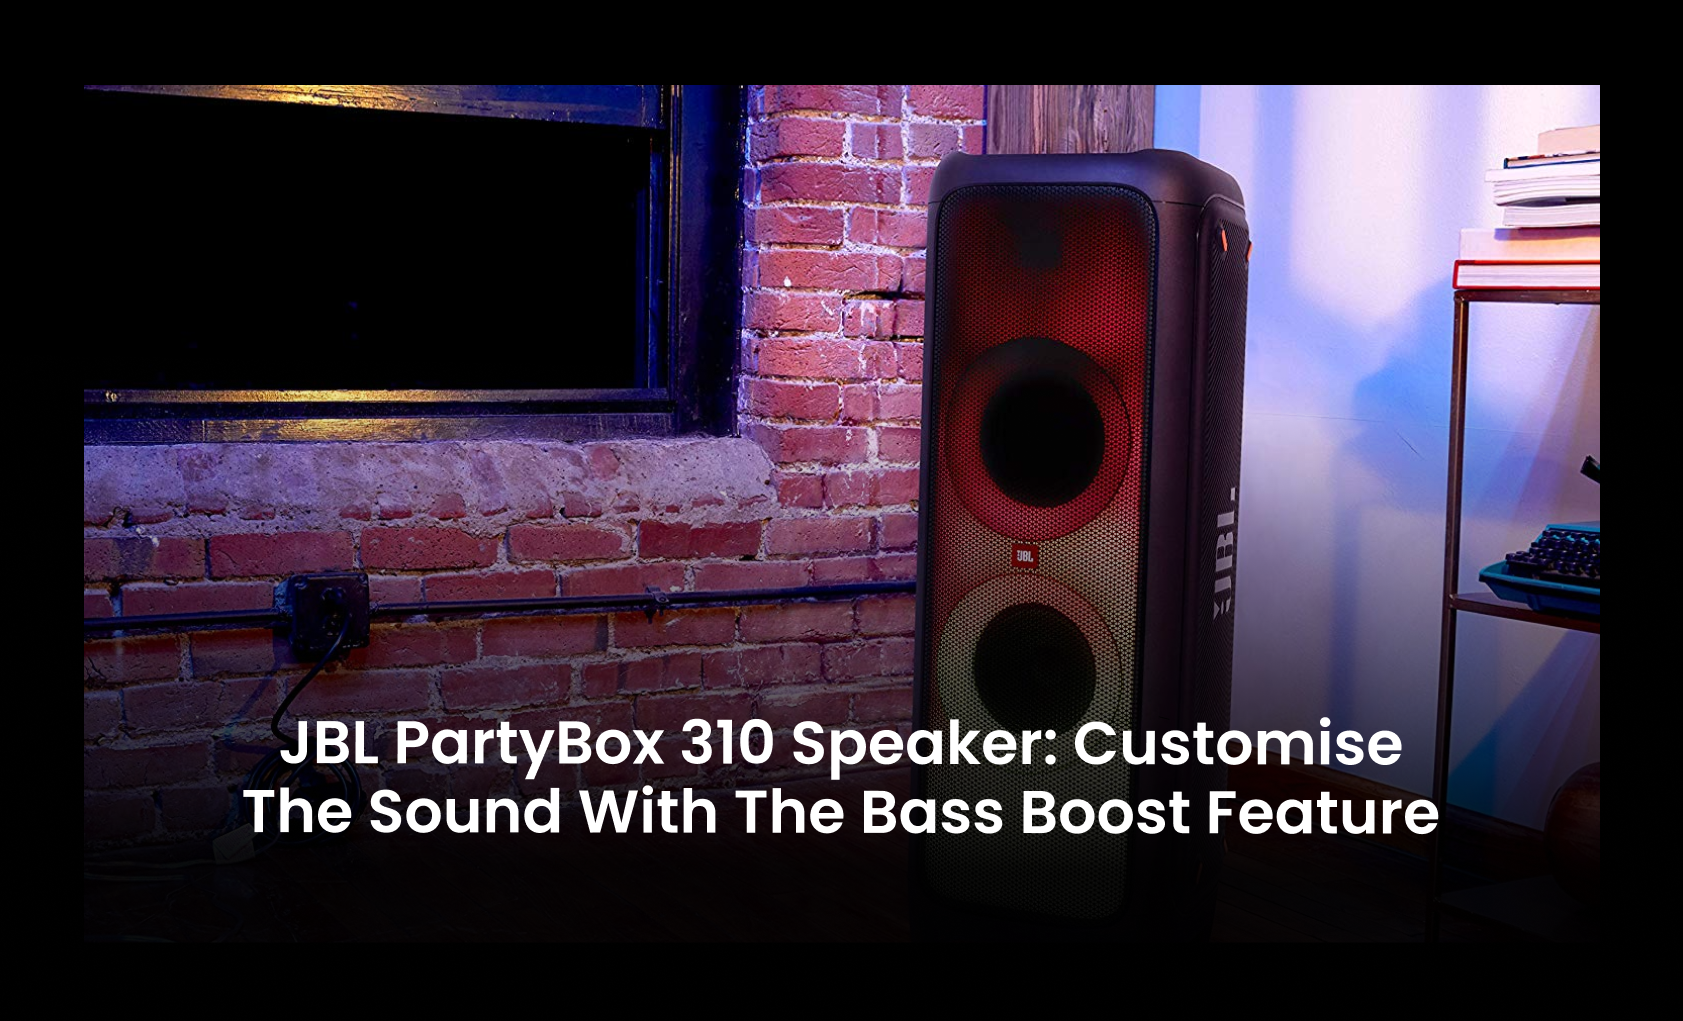 Would something like this work for jbl partybox 710 in car.Ik the